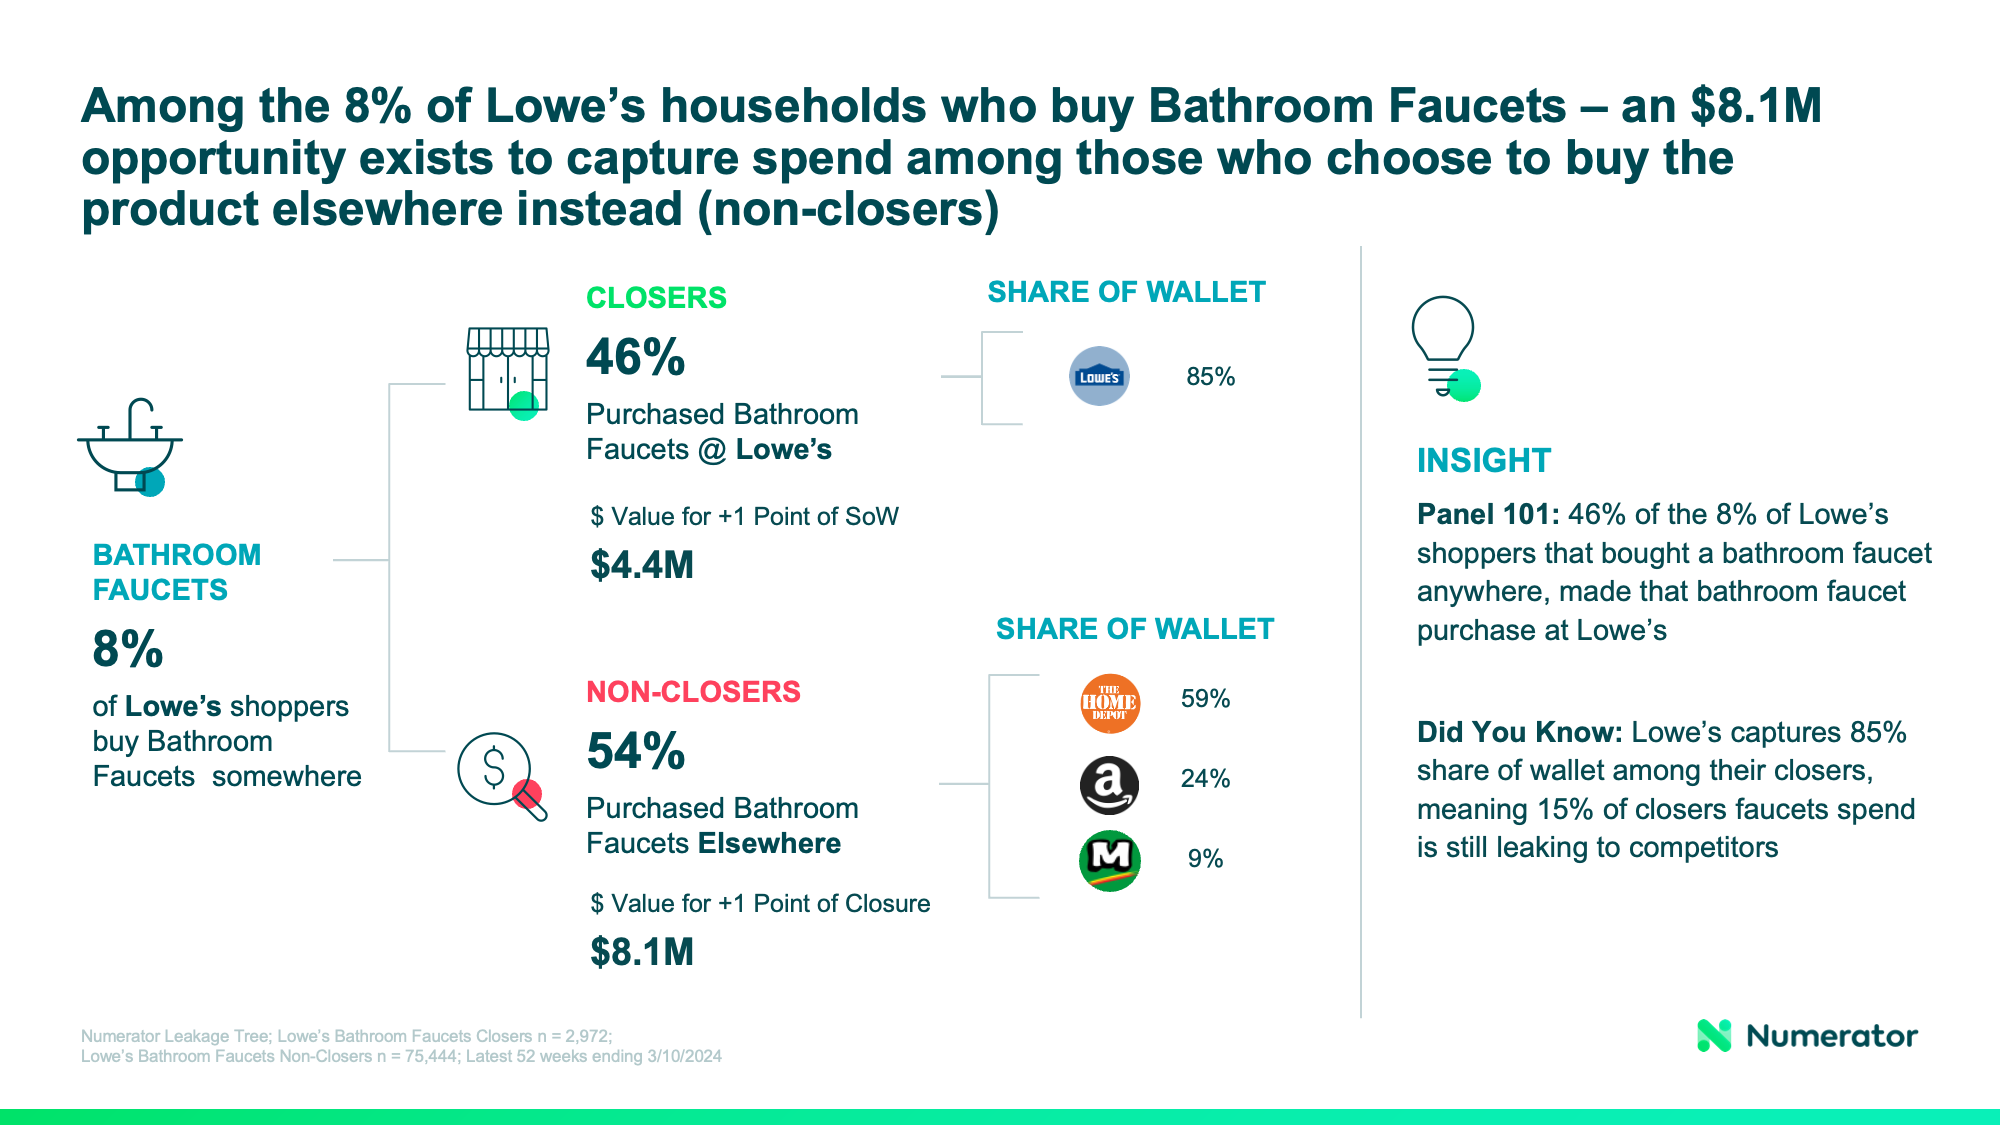 Among the 8% of Lowe's households who buy bathroom faucets - an $8.1M opportunity exists to capture spend among those who choose to buy the product elsewhere instead (non-closers). 